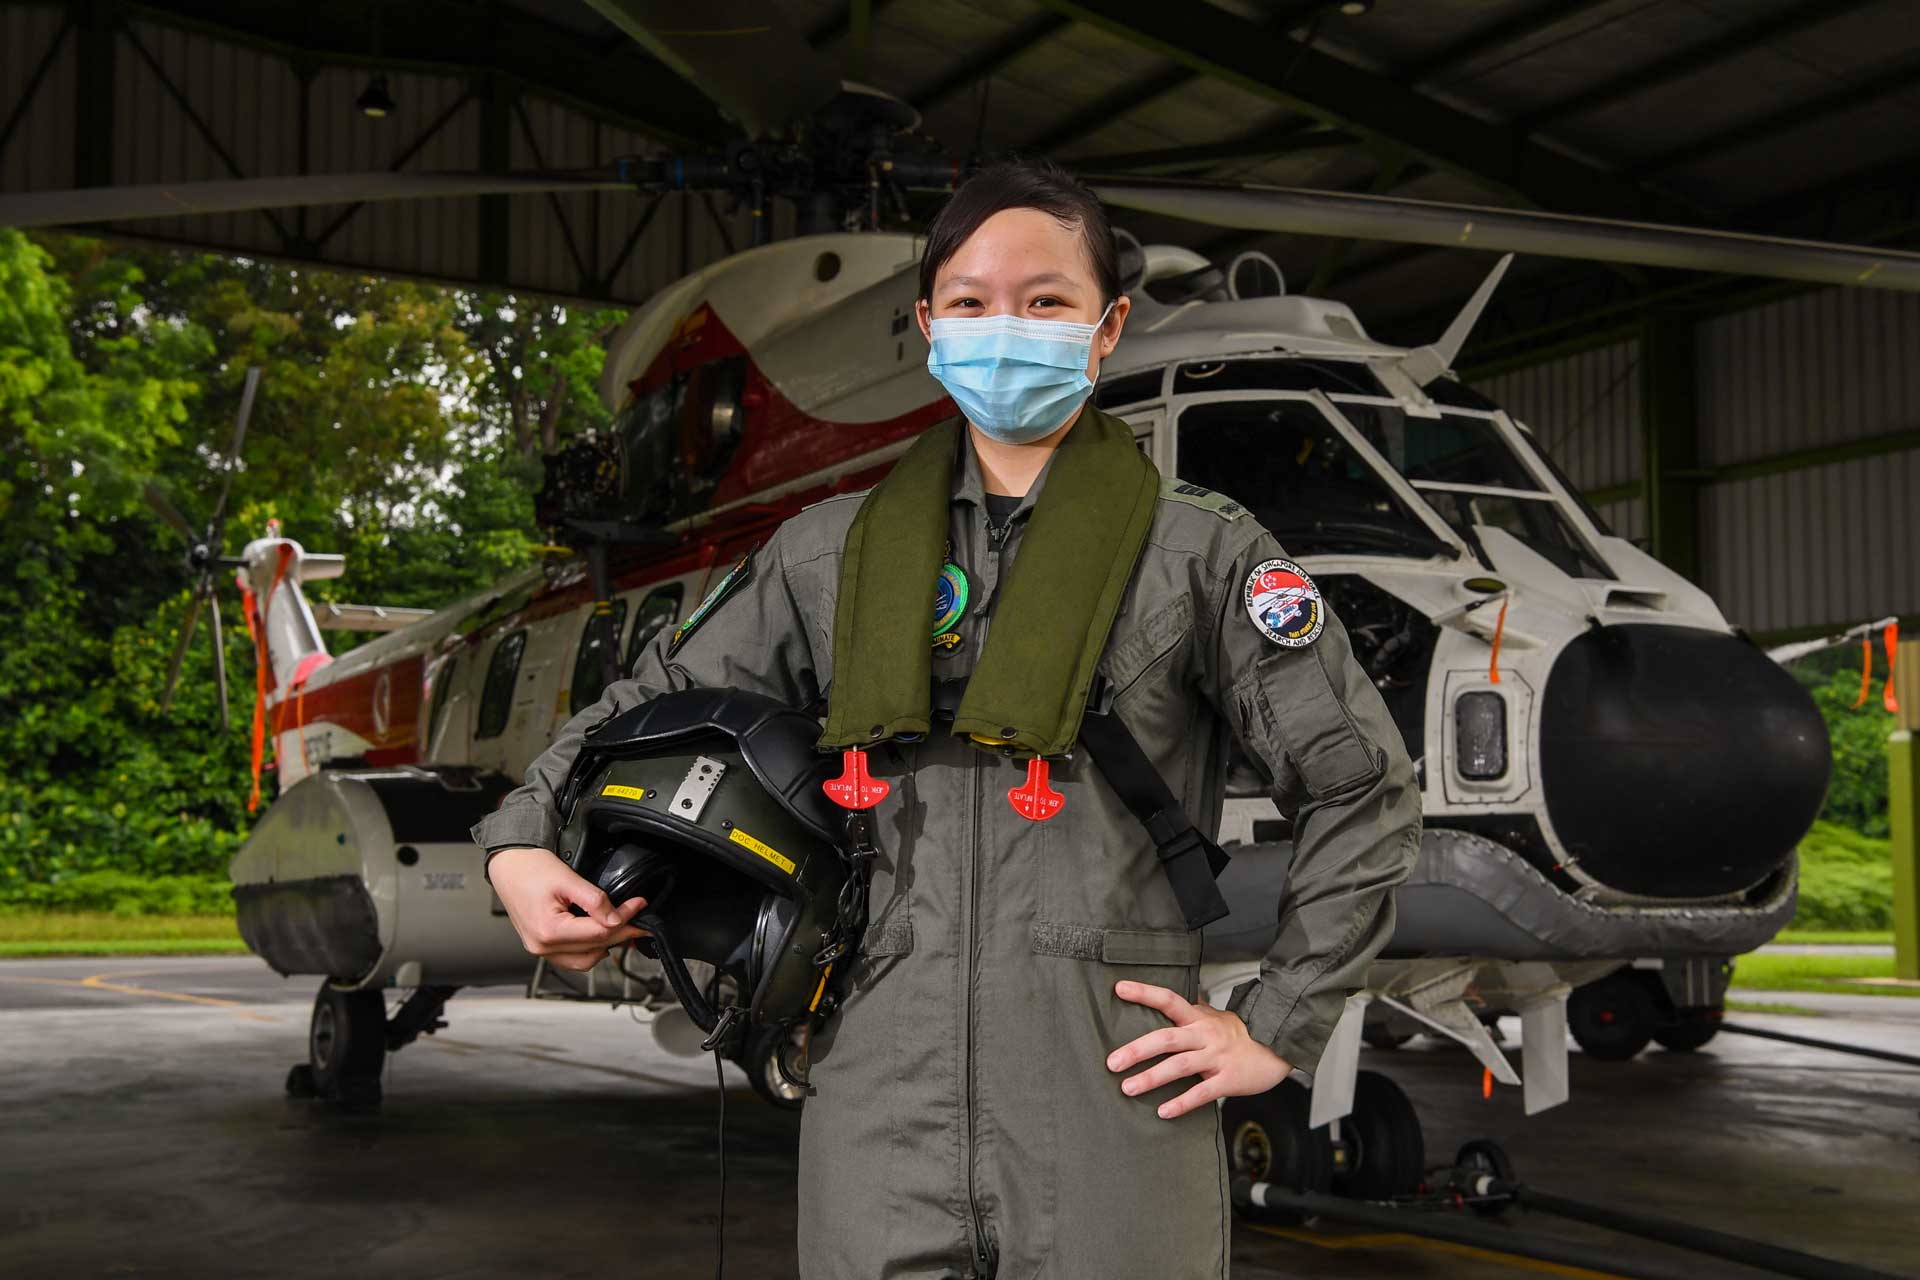 RSAF's first female search-and-rescue doctor